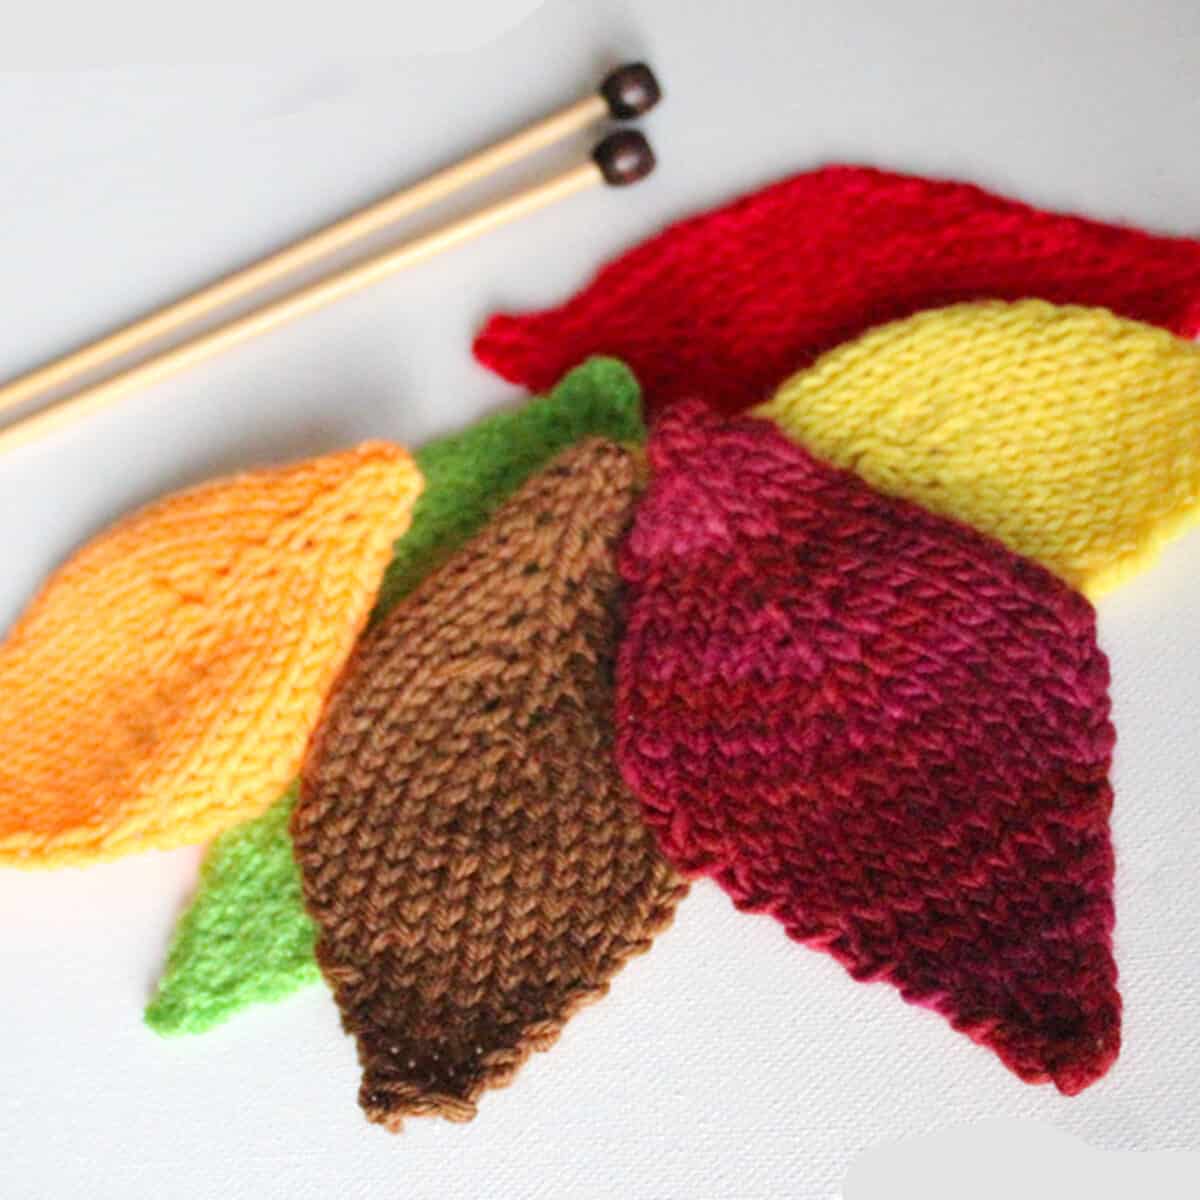 Knitted Leaf shapes in brown, green, yellow, and red colored yarn.